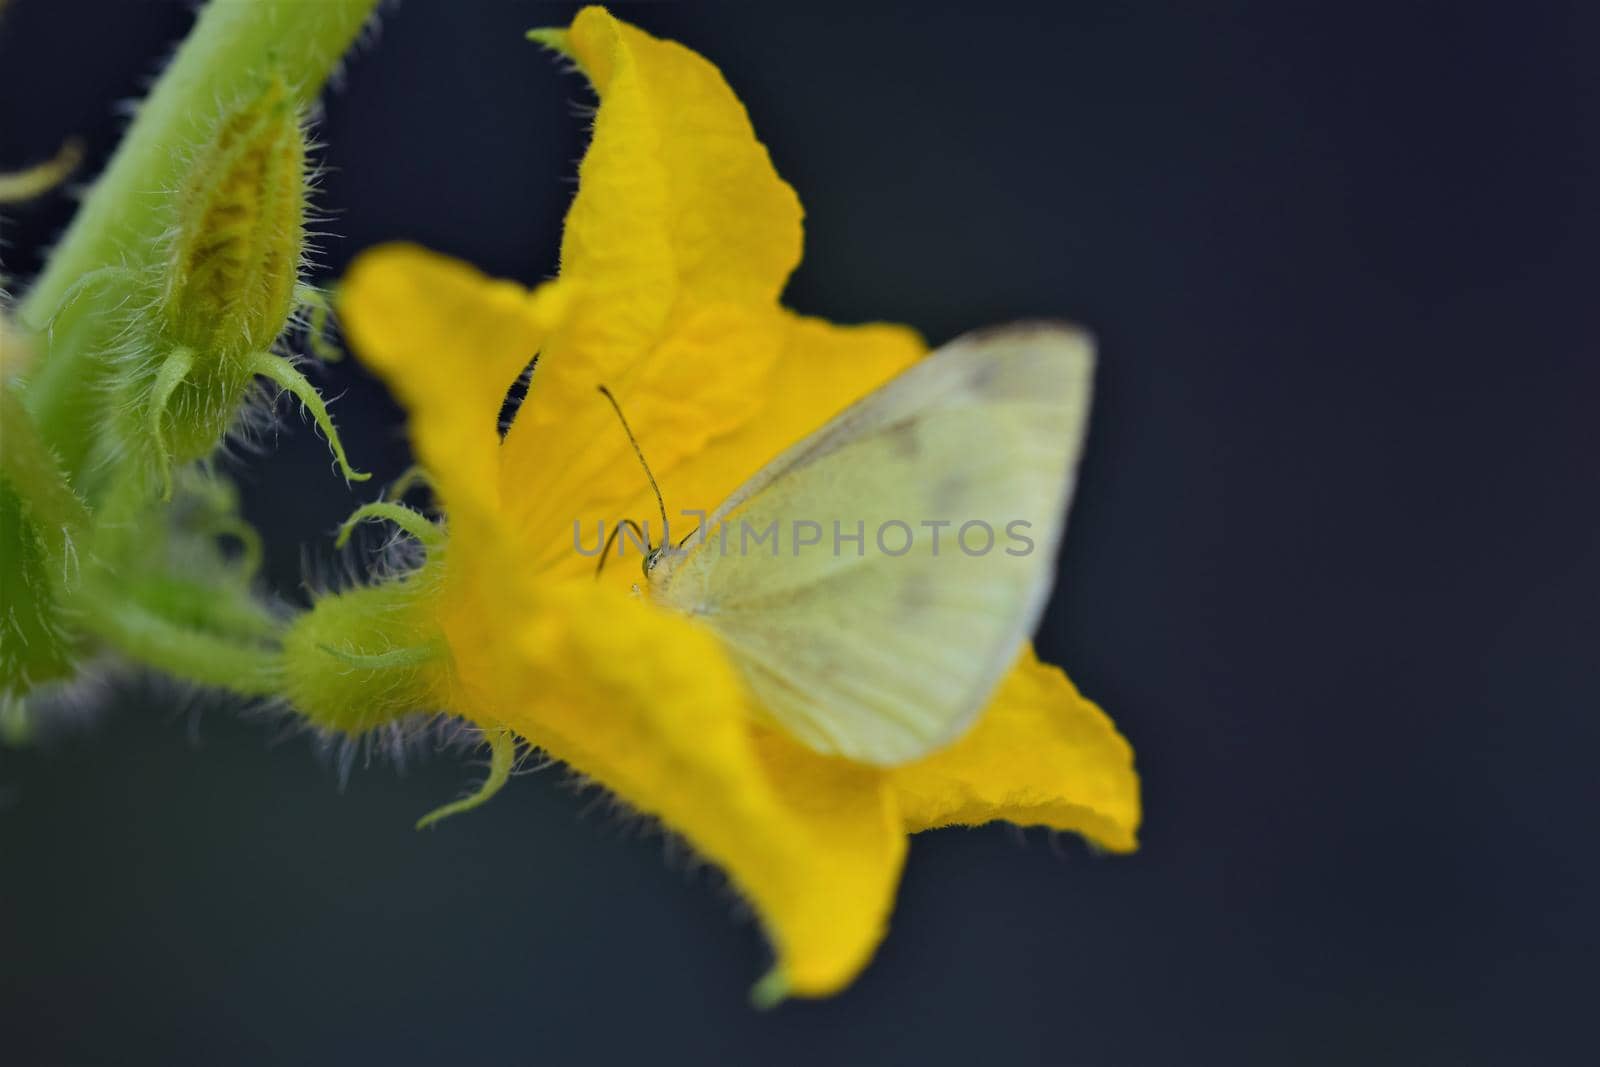 Pieris rapae - cabbage white butterfly in a cucumber blossom as a close up by Luise123